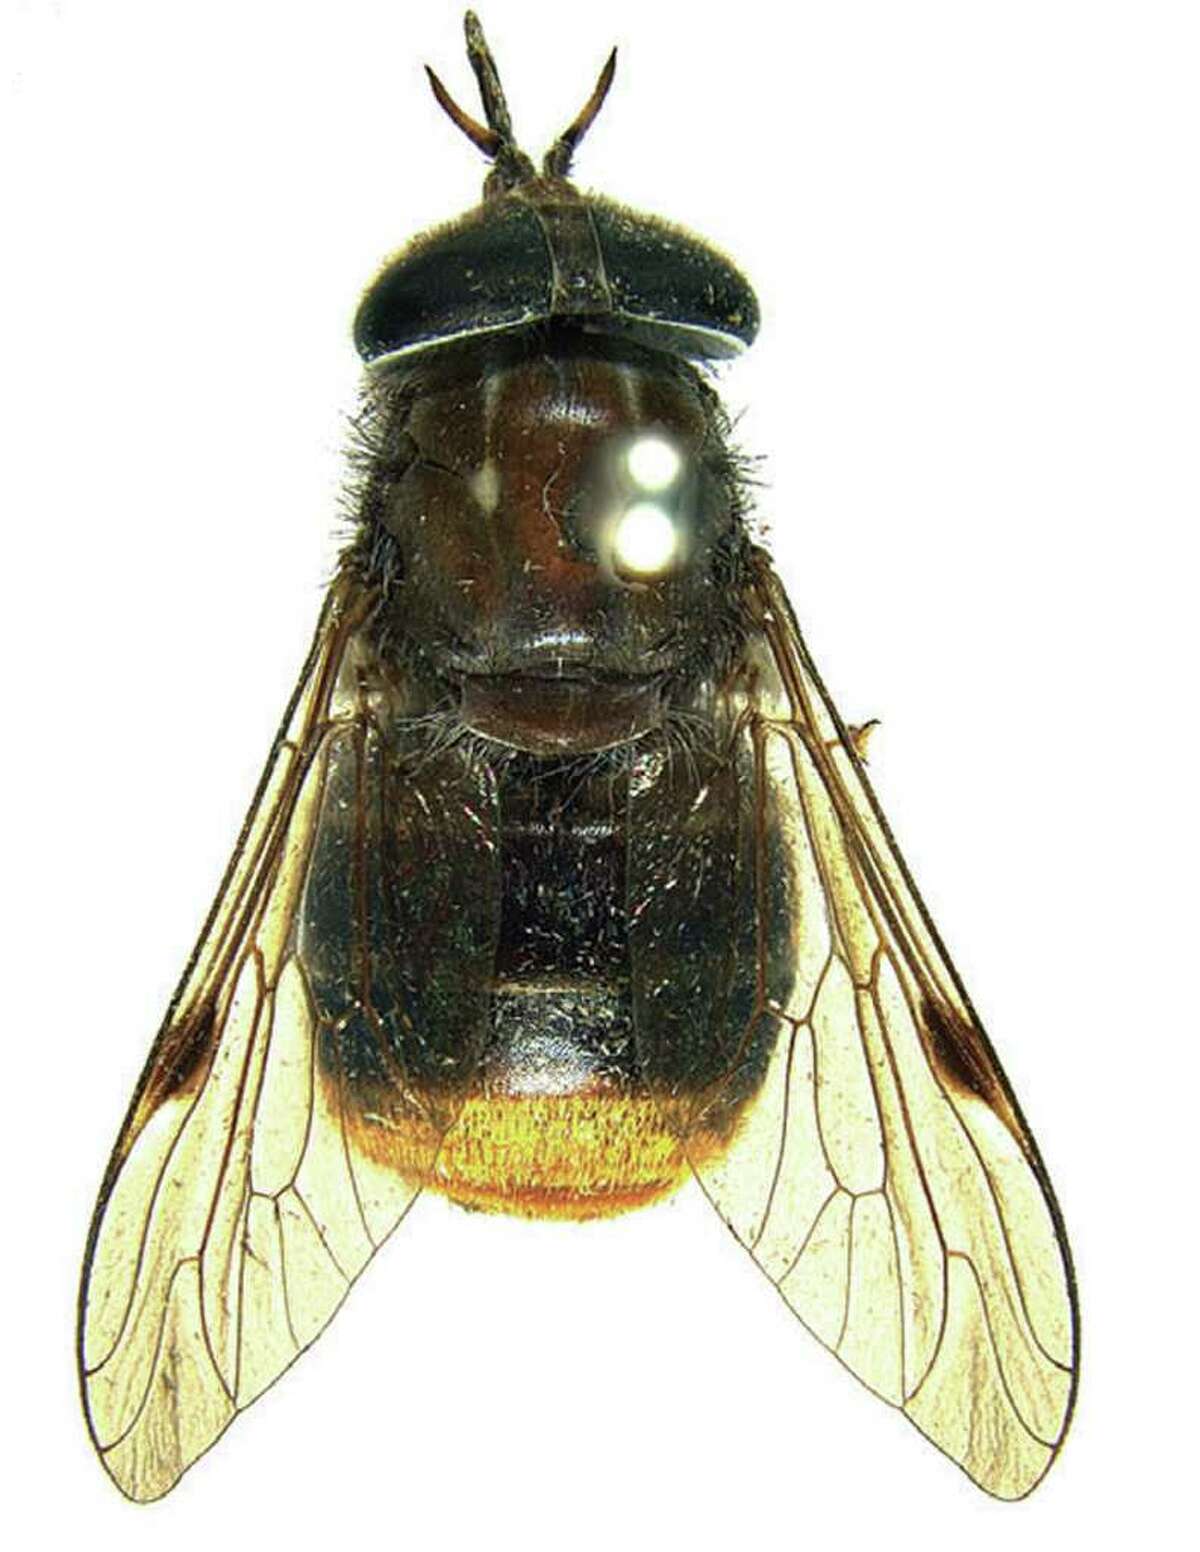 In this 2009 photo released by researcher Bryan Lessard of Commonwealth Scientific and Industrial Research Organization (CSIRO), a newly discovered horse fly in Austrlia with its golden-haired bum is shown at the Australian National Insect Collection, Canberra, Australia. For 24-year-old CSIRO researcher Lessard, a fan of pop diva Beyonce, there was only one name worthy of its beauty: Beyonce, He told The Associated Press Monday, Jan.16, 2012 he wanted to pay respect to the insect's beauty by naming it Scaptia (Plinthina) beyonceae. (AP Photo/Bryan Lessard, Commonwealth Scientific and Industrial Research Organization) NO SALES, EDITORIAL USE ONLY, CREDIT MANDATORY